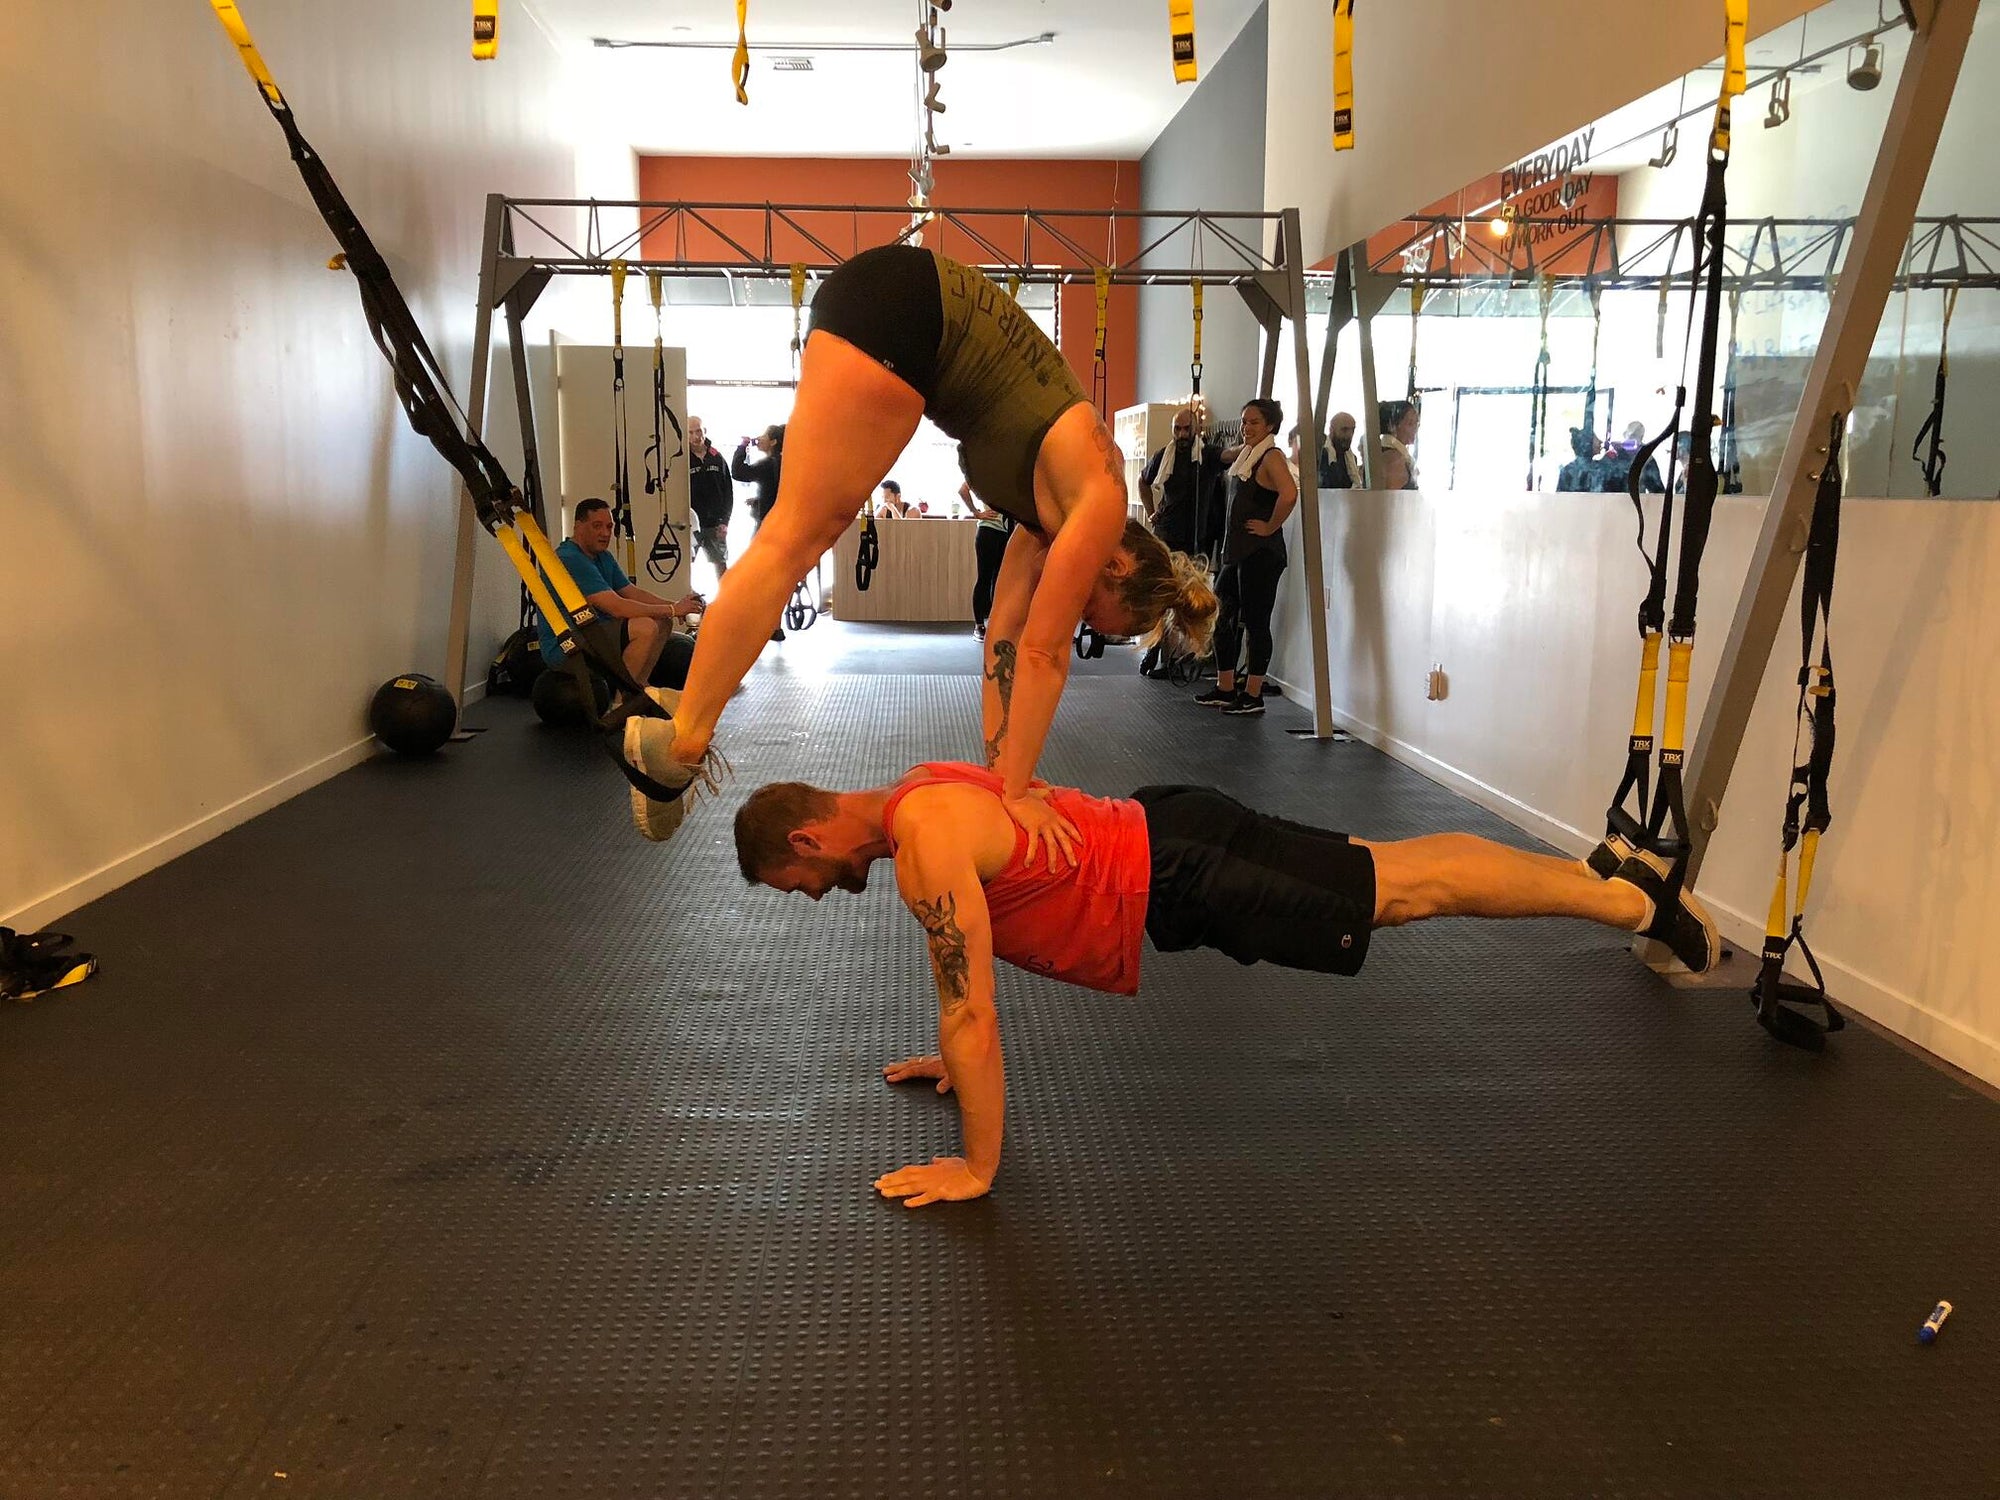 WHAT'S YOUR BEST TRX PARTY TRICK?